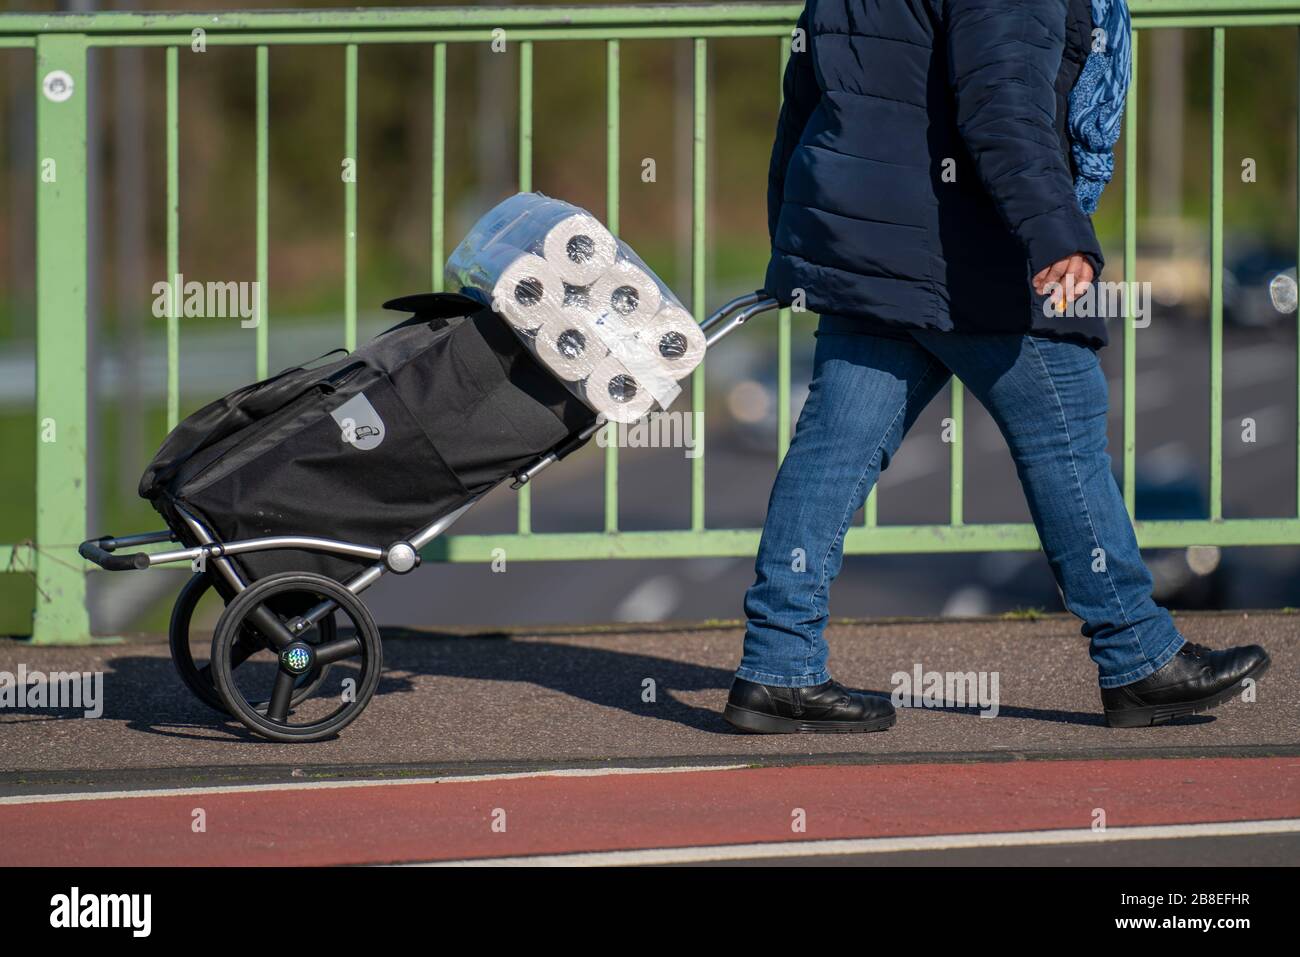 Effects of the coronavirus crisis, woman has bought a bulk pack of toilet paper, Cologne, Germany, Stock Photo